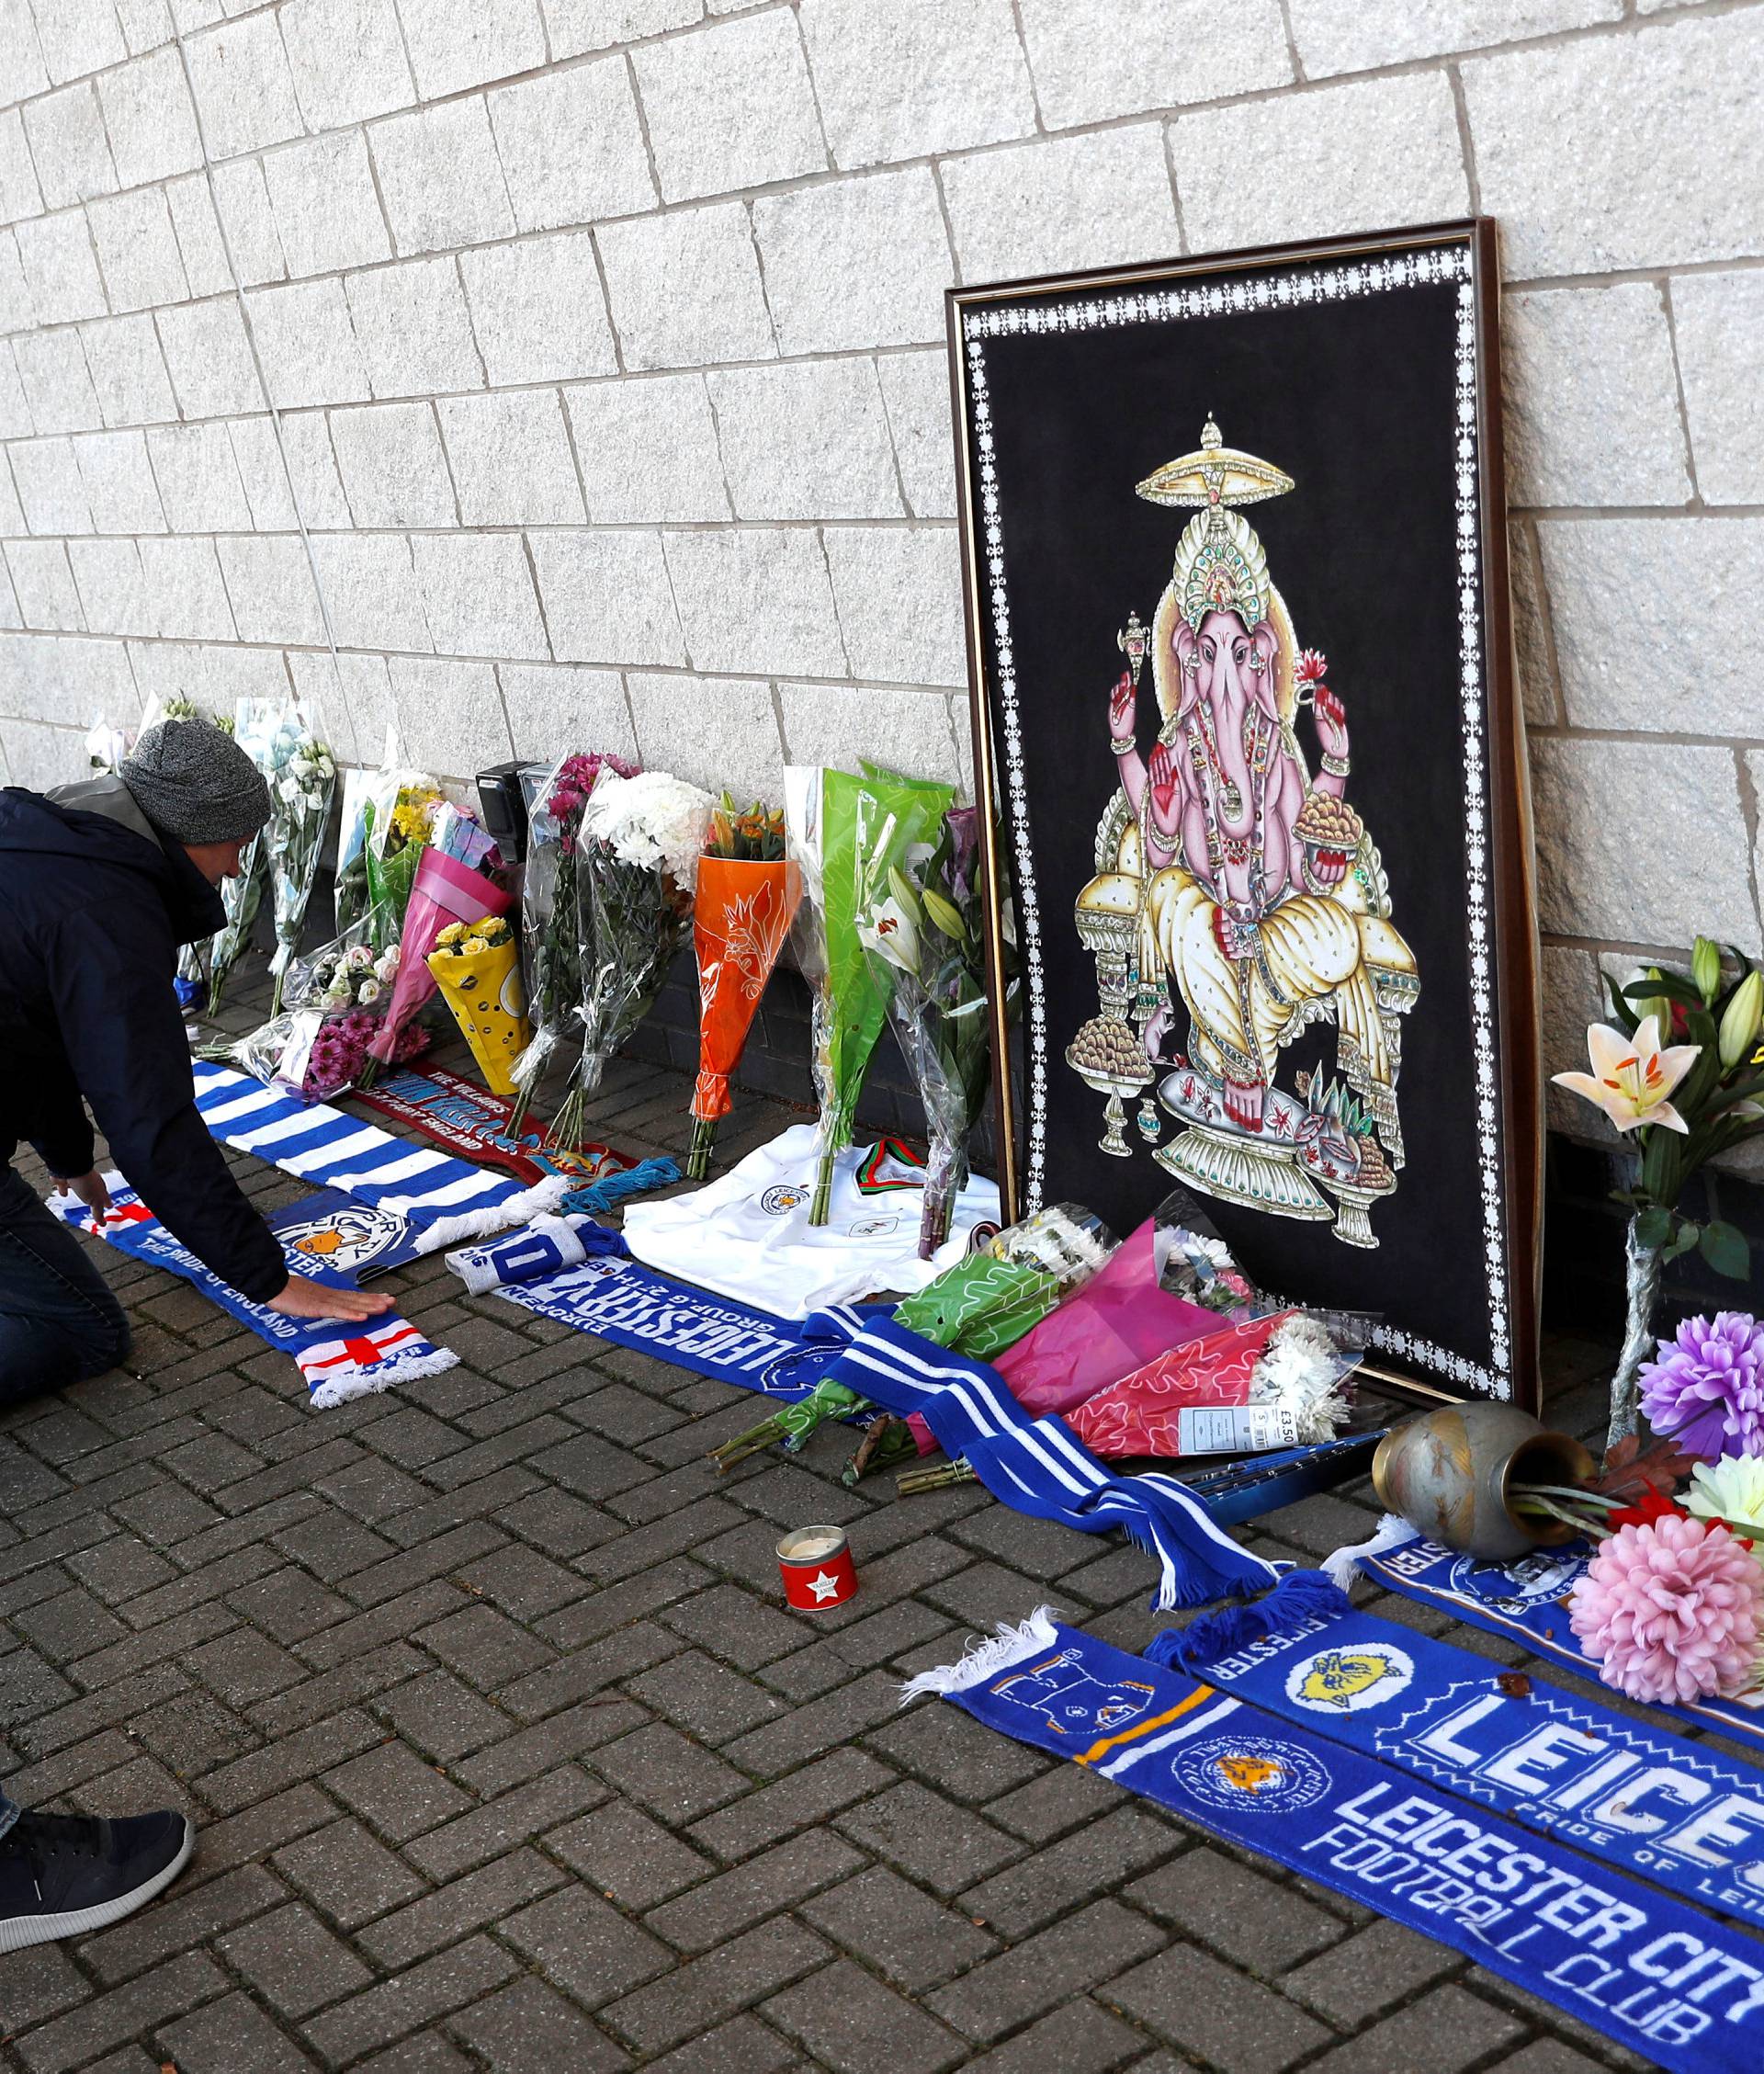 Leicester City football fans place flowers outside the football stadium after the helicopter of the club owner Thai businessman Vichai Srivaddhanaprabha crashed when leaving the ground on Saturday evening after the match, in Leicester